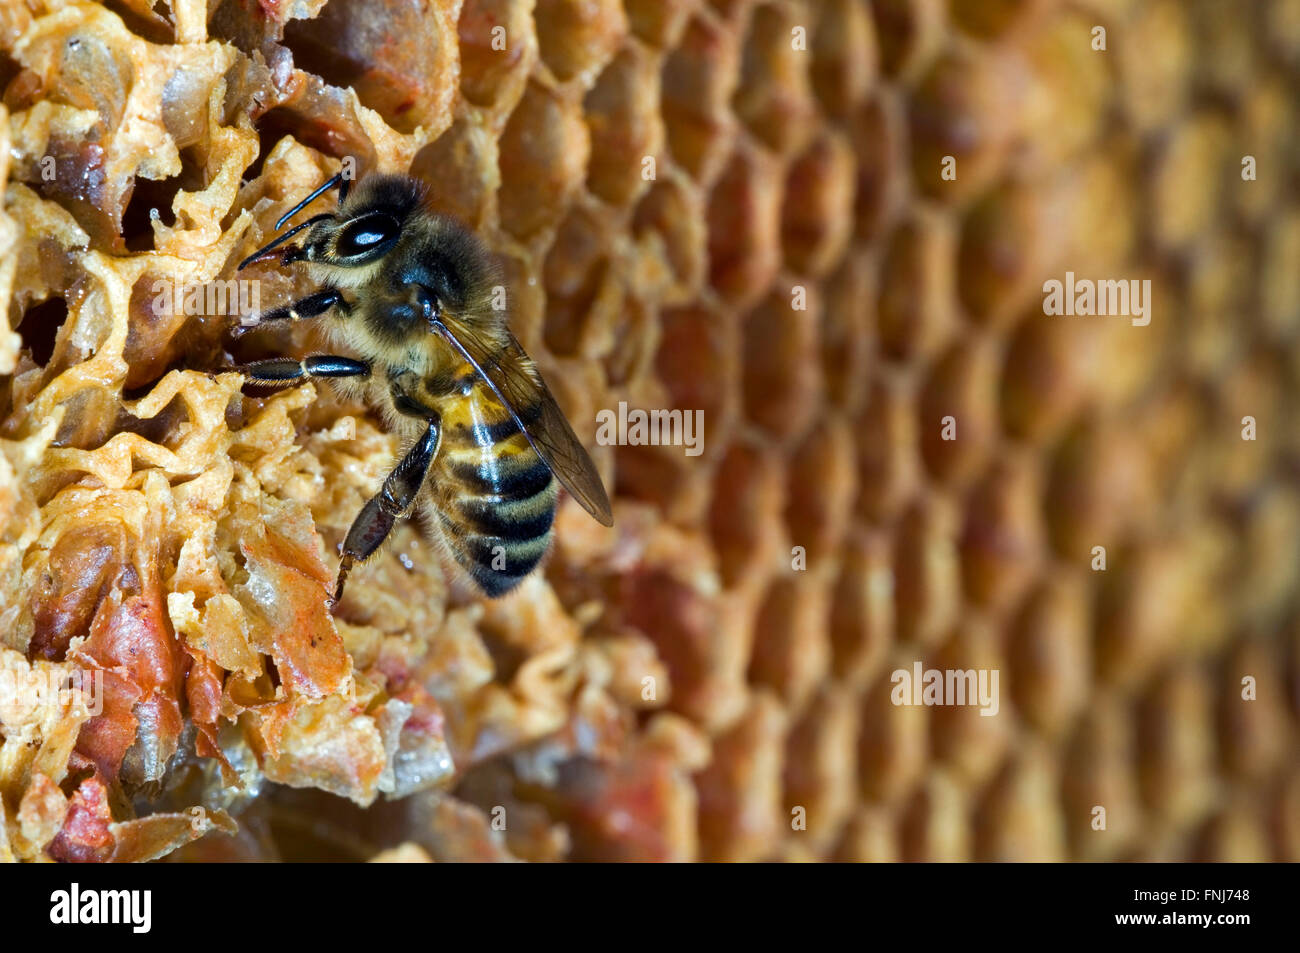 Honey bee worker(Apis mellifera) on comb showing decapped and uncapped cells inside hive Stock Photo